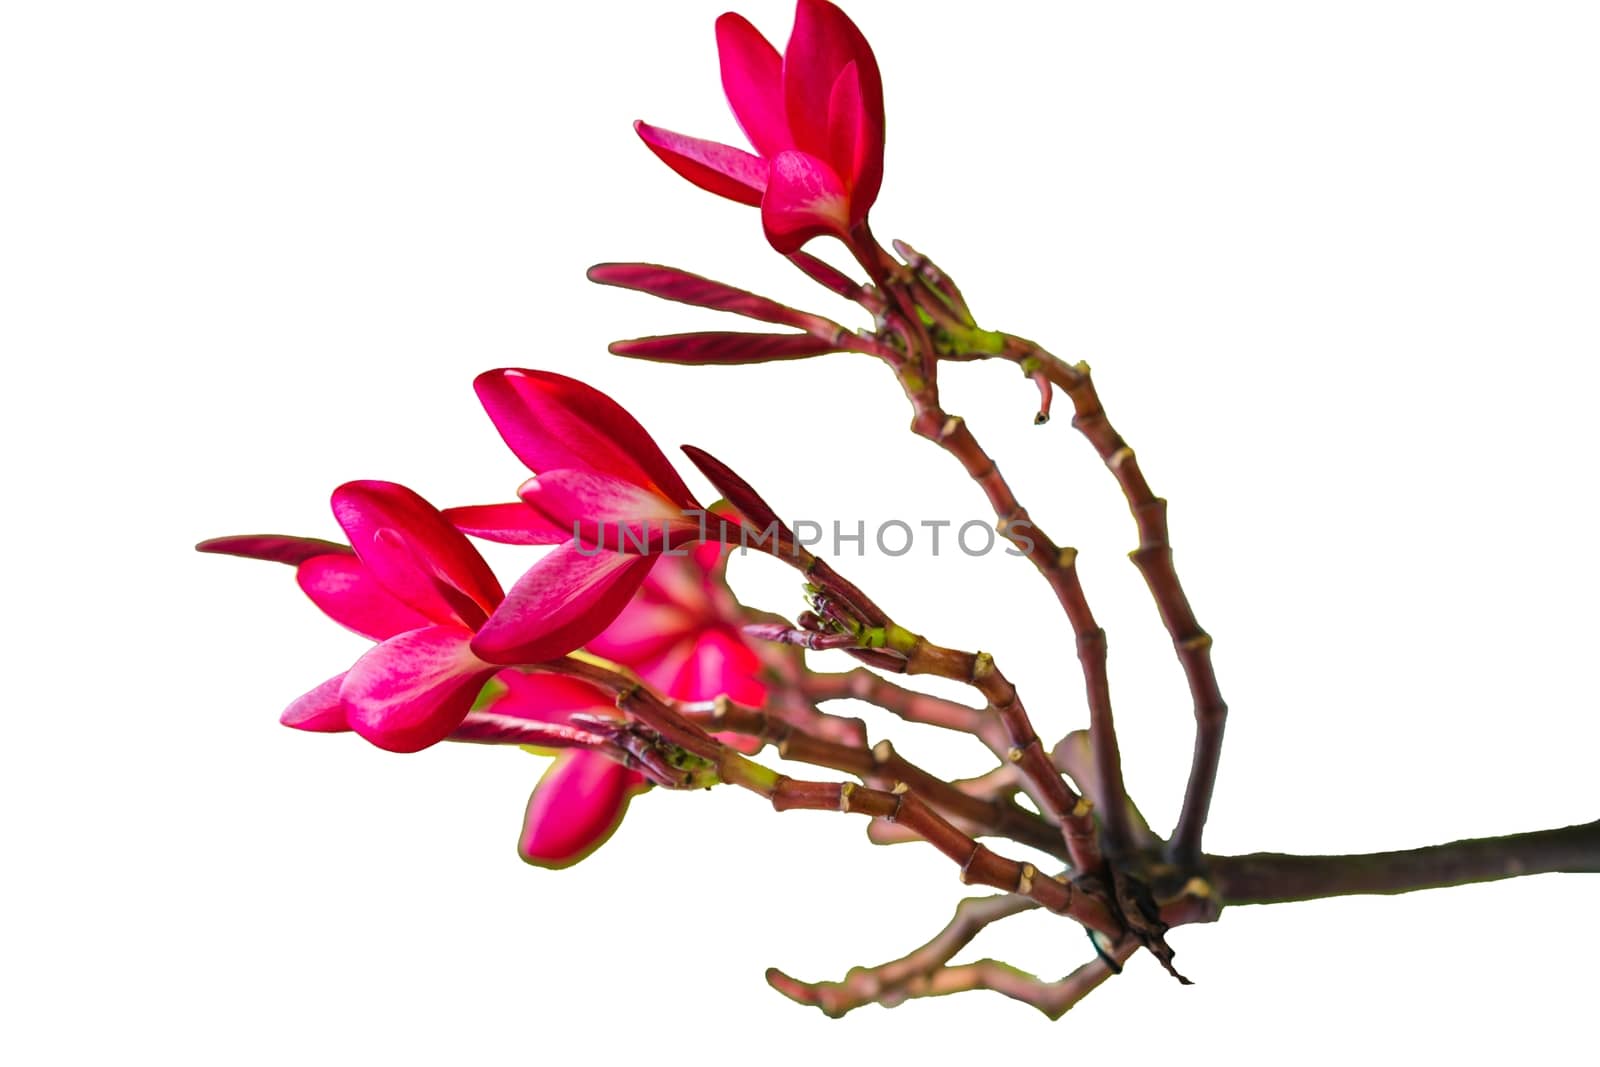 Pink Plumeria Flower Blooming Outdoors isolated on white background by peerapixs